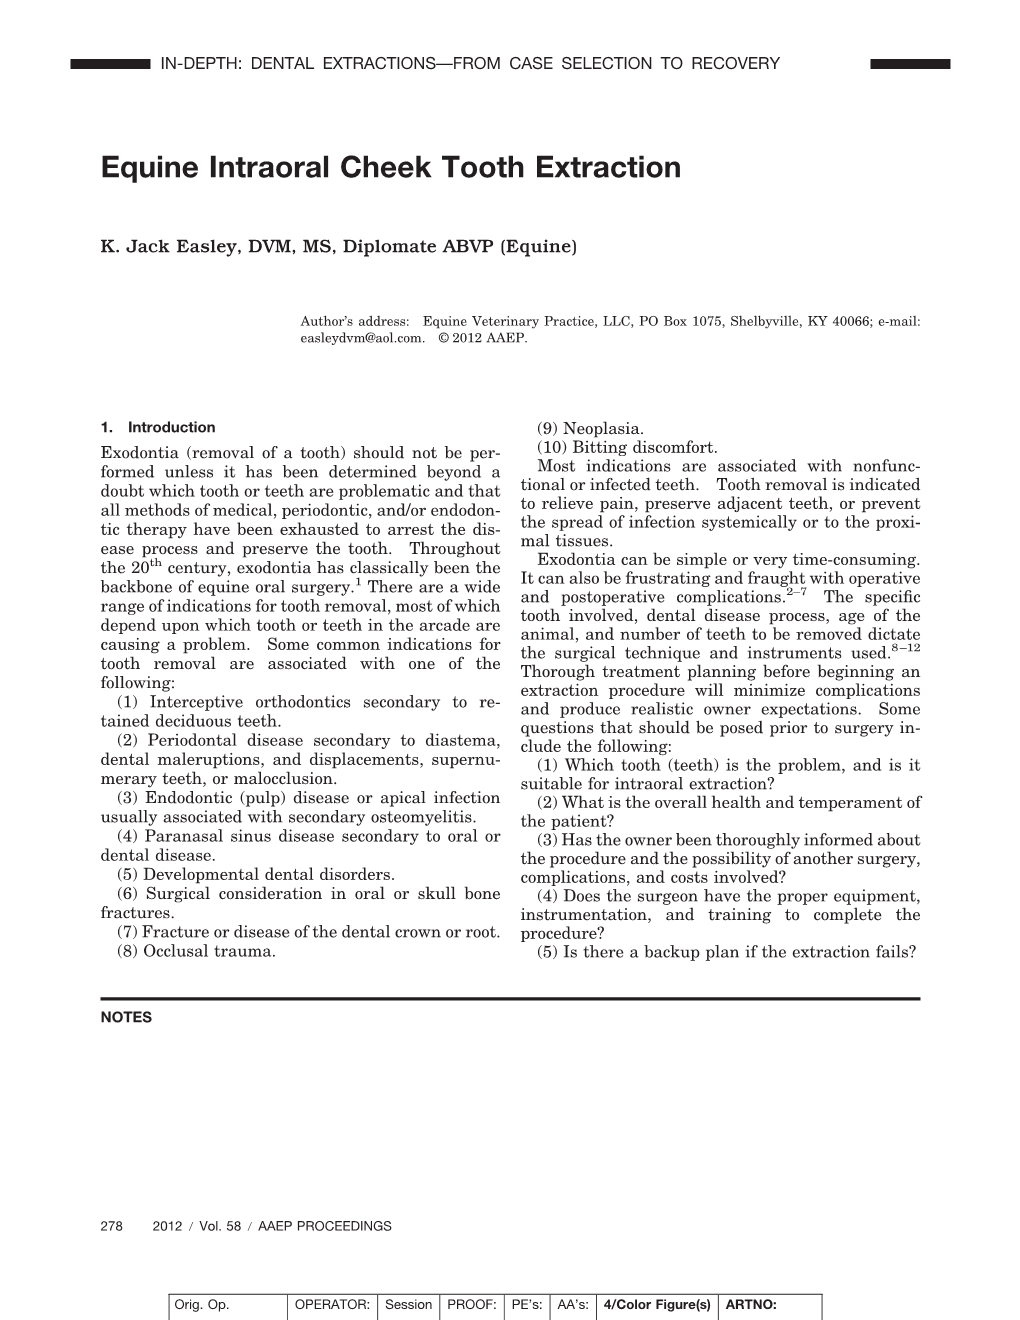 Equine Intraoral Cheek Tooth Extraction